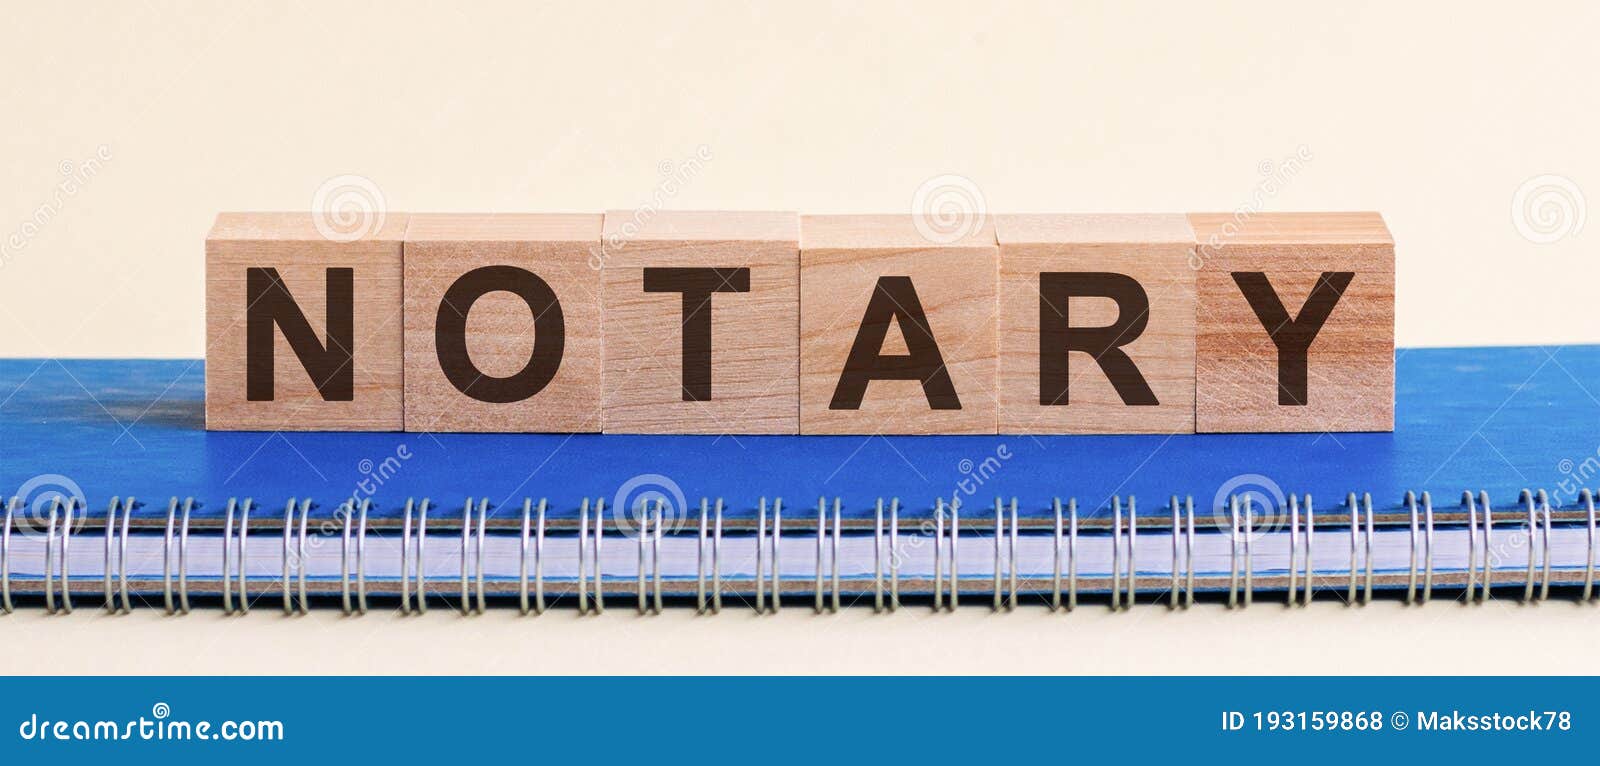 word notary formed by alphabet blocks, white background, front view